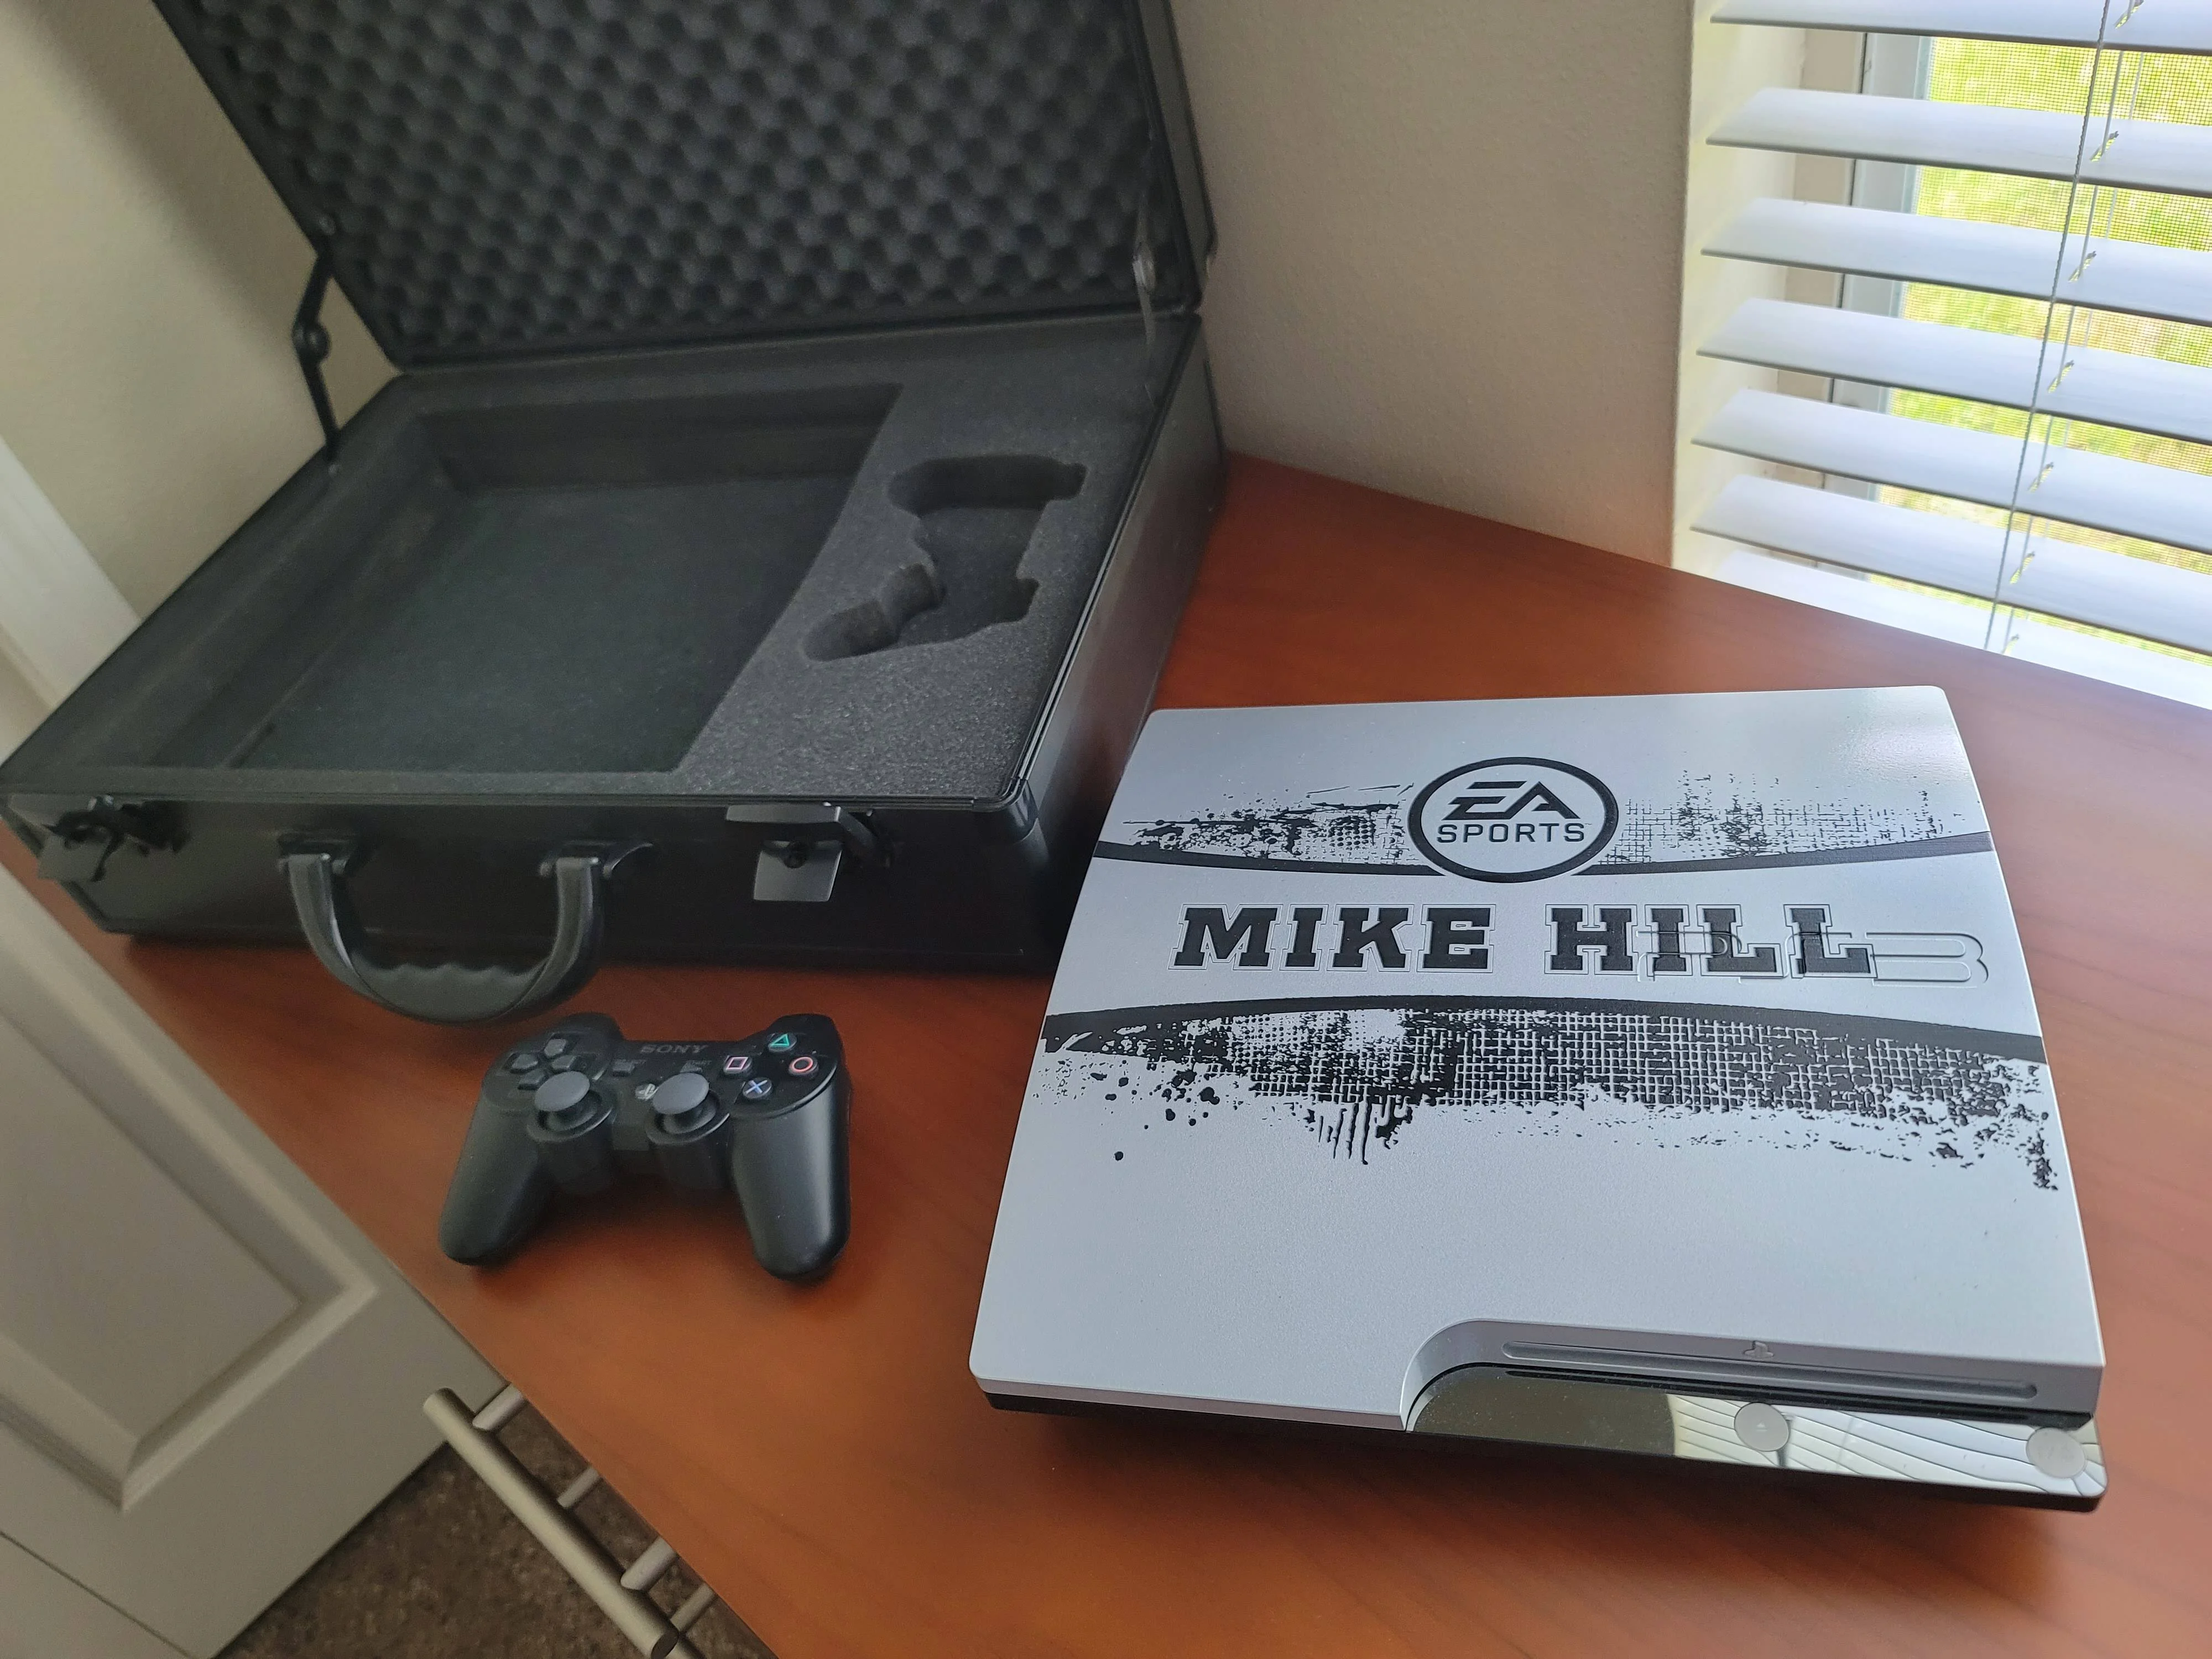  Sony PlayStation 3 Slim EA Sports Mike Hill Console